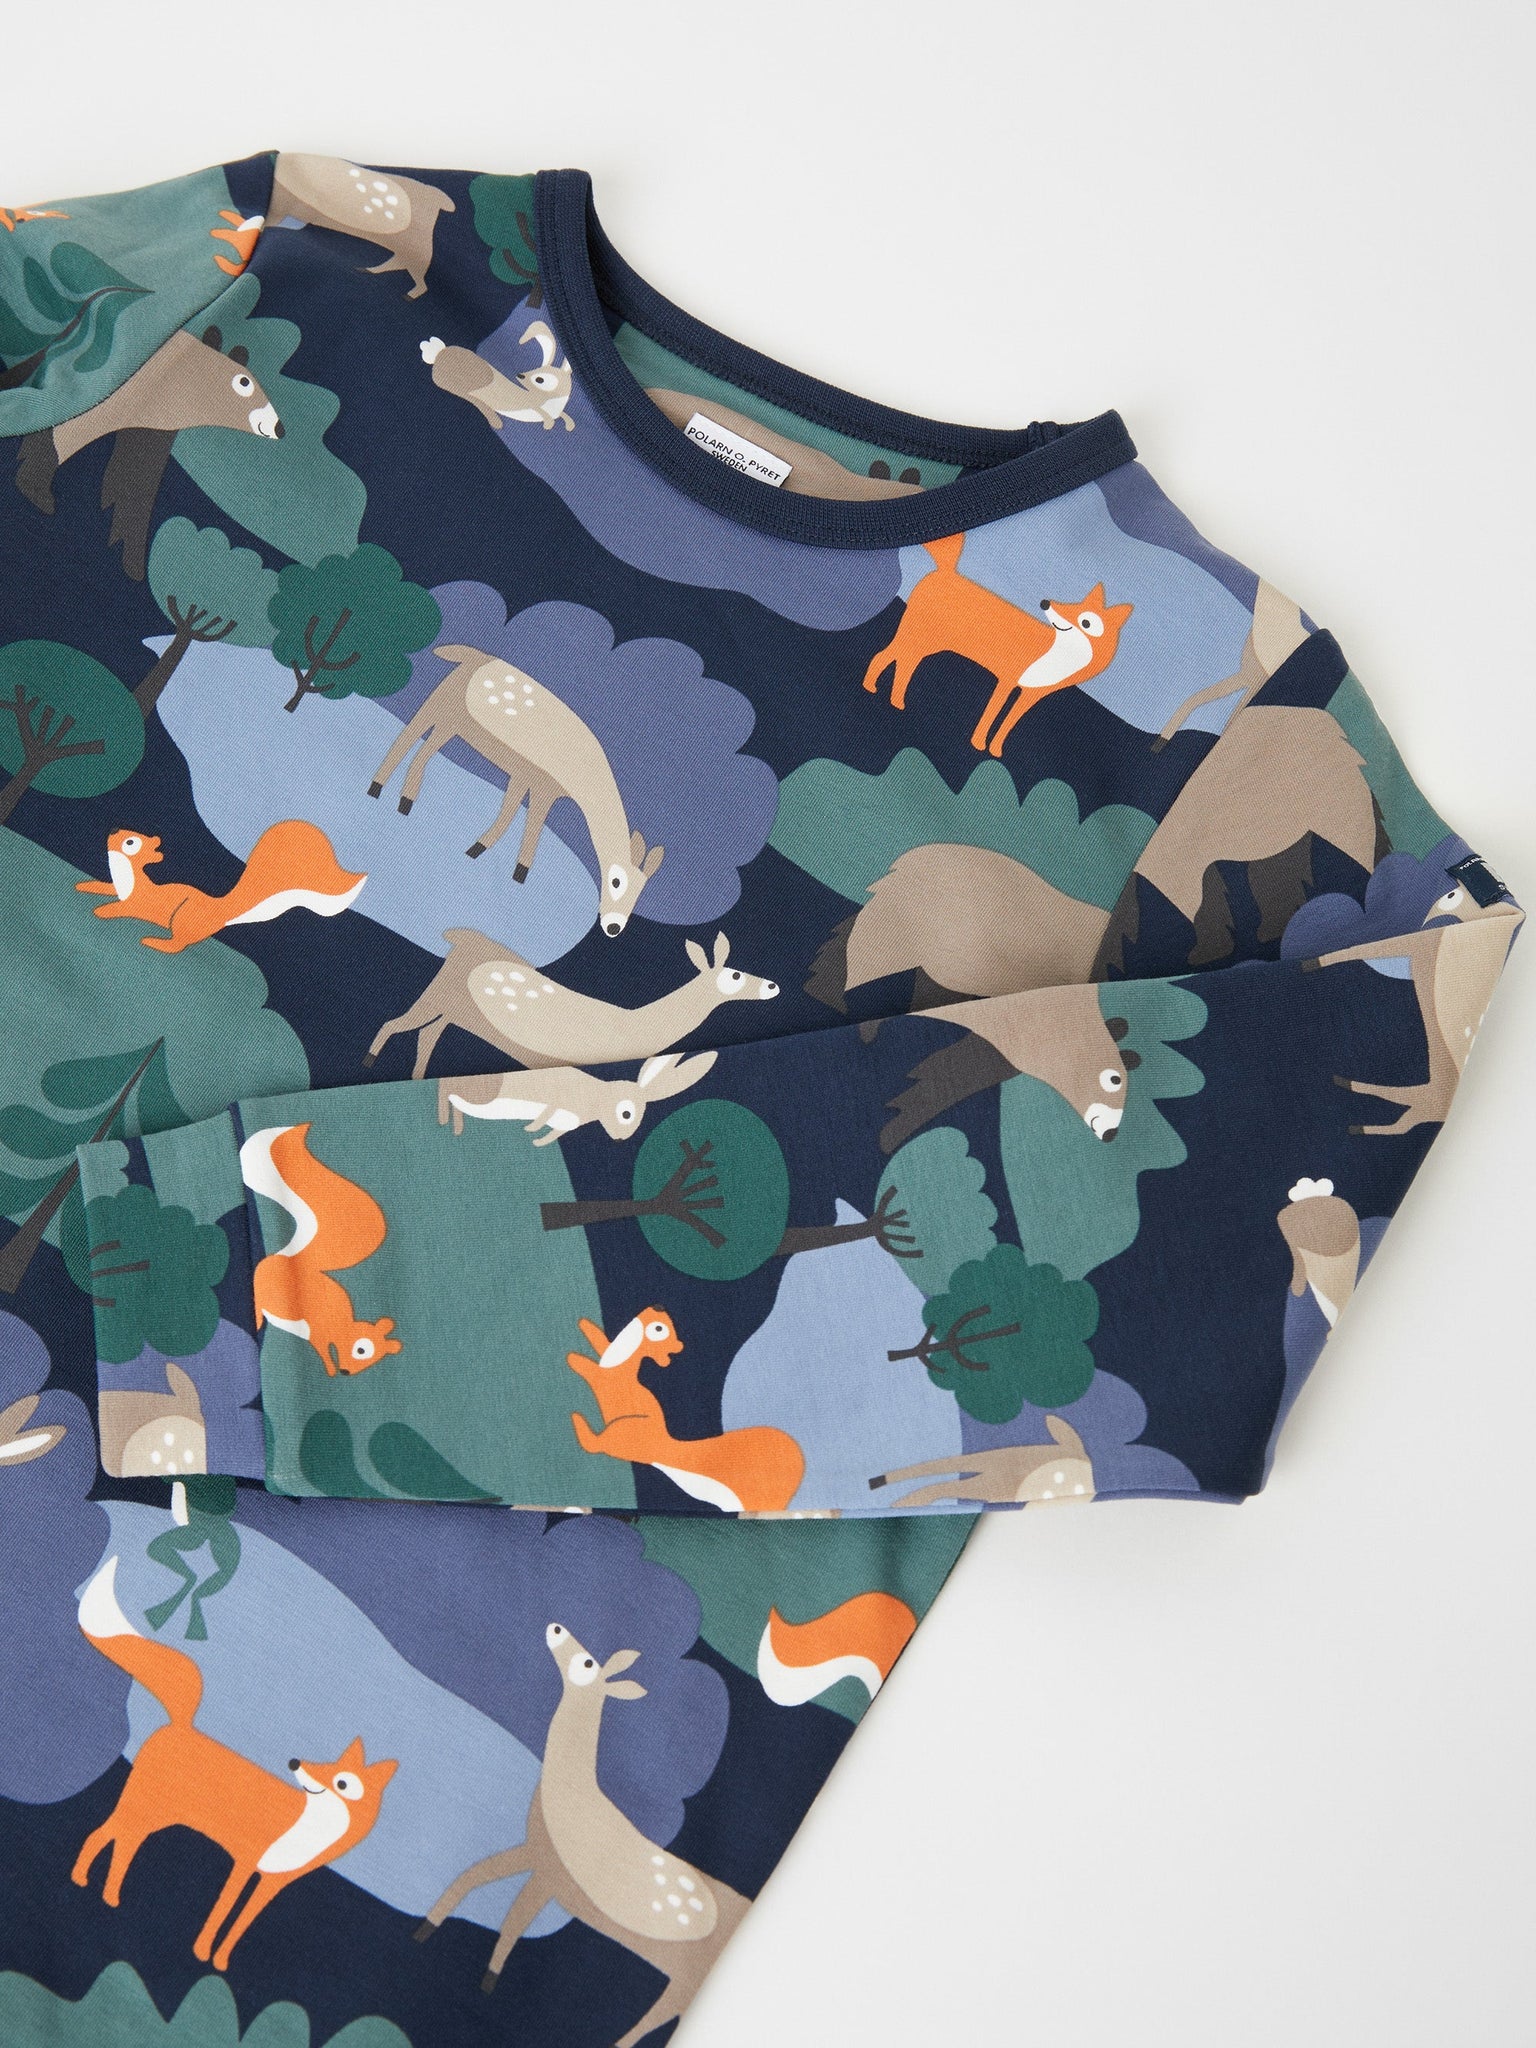 Cotton Woodland Print Navy Kids Top from the Polarn O. Pyret kids collection. Clothes made using sustainably sourced materials.